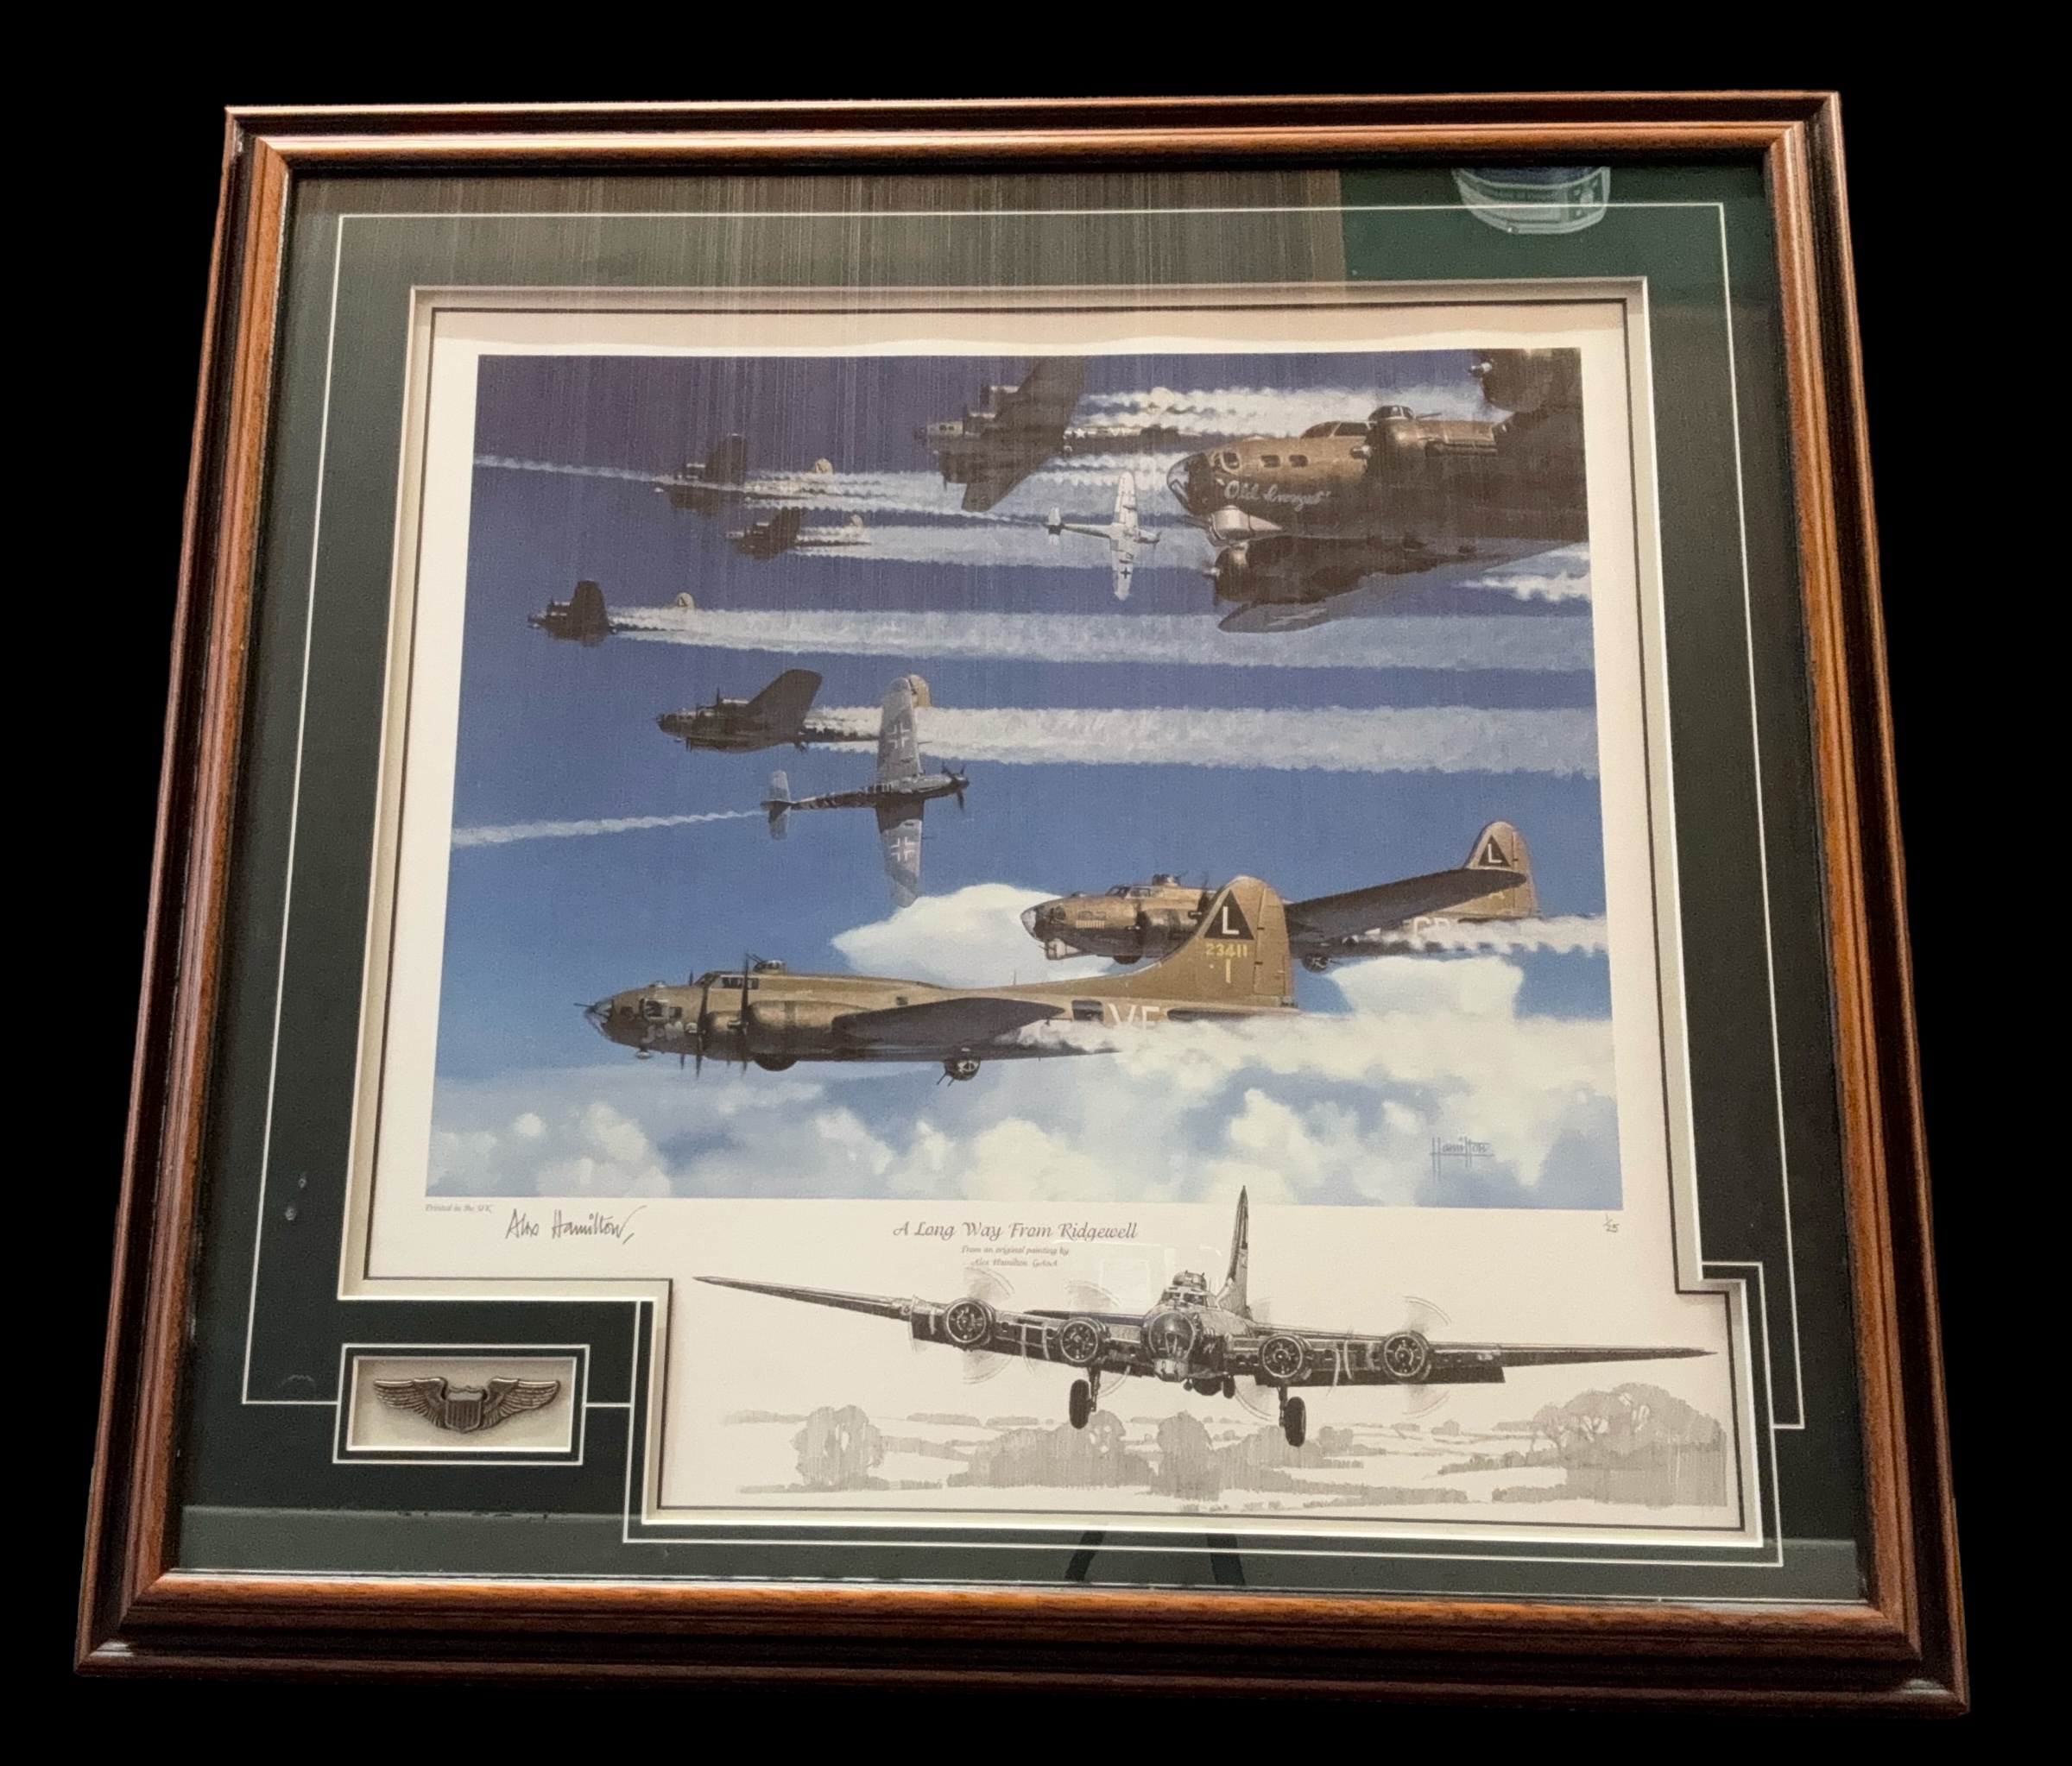 WW2 Print titled A Long Way from Ridgewell by Alex Hamilton. Limited 1/25, signed by the artist Alex - Image 2 of 3